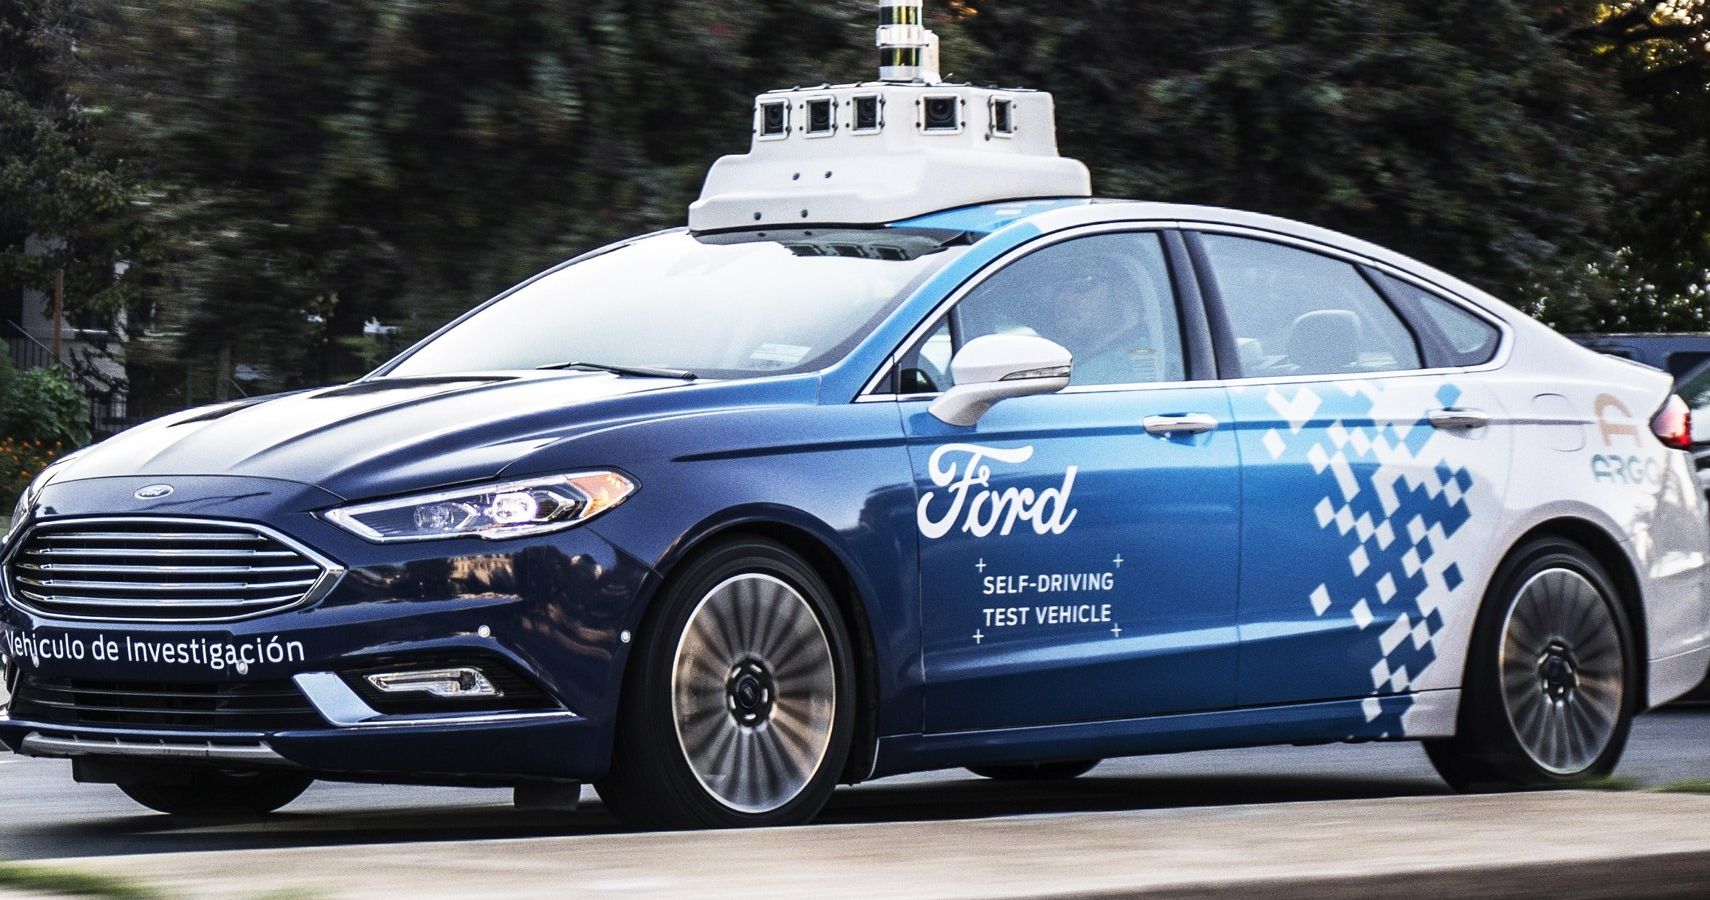 10 Updates About Self Driving Cars (And When Are They launching)